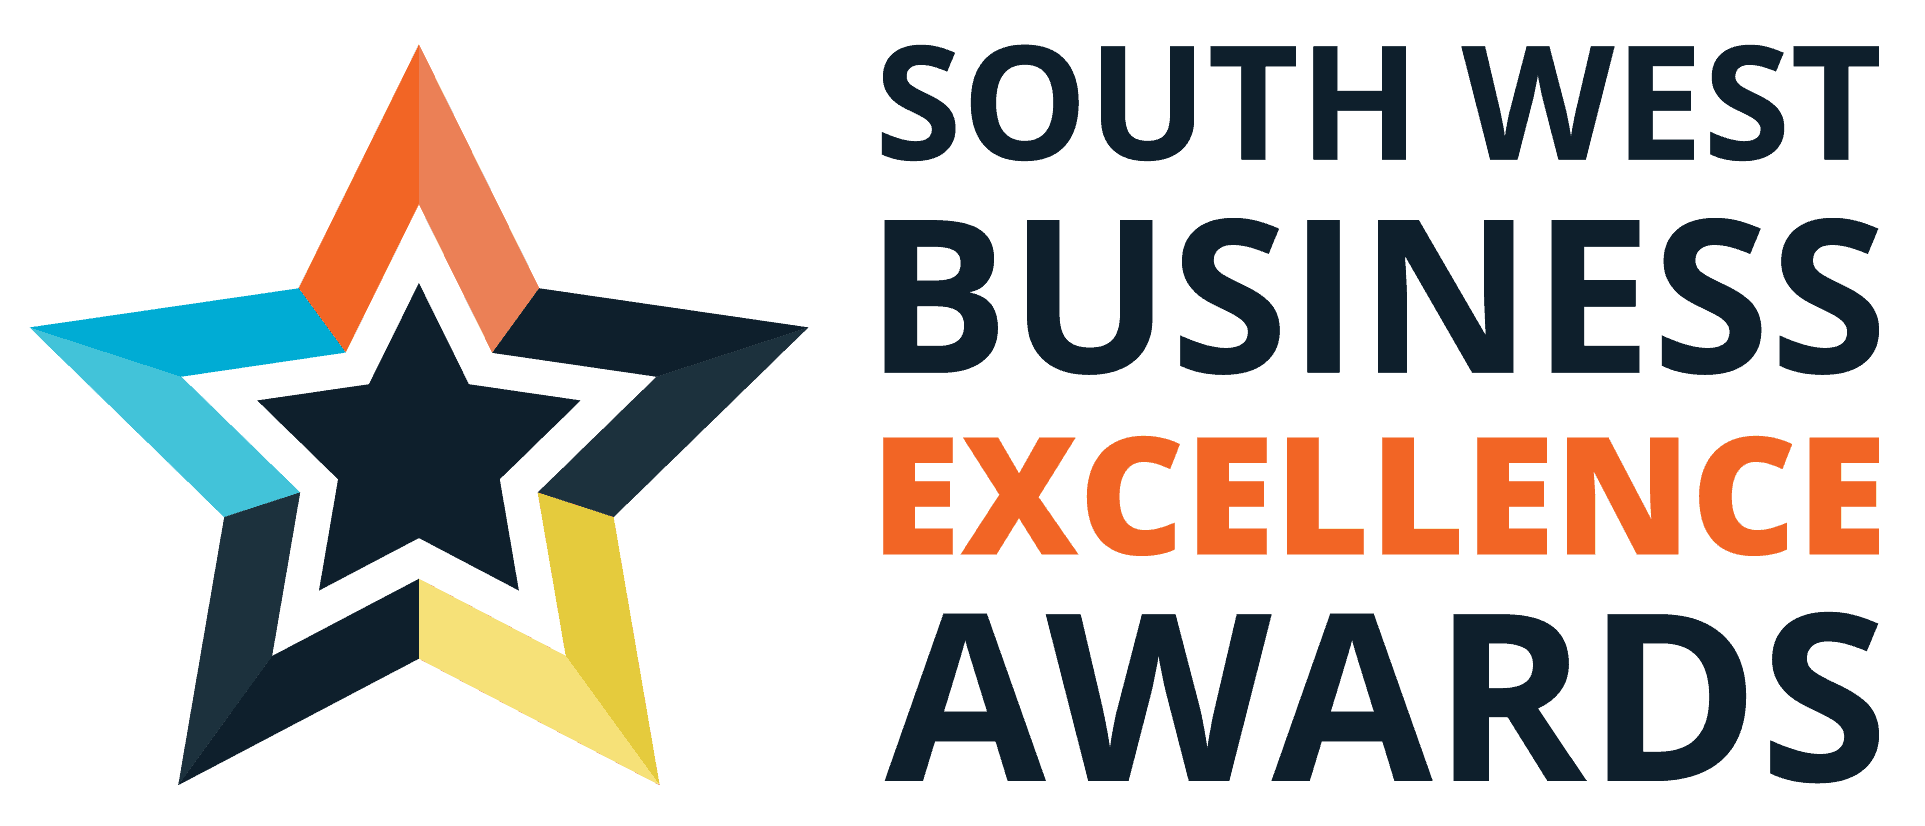 south wets business excellence awards